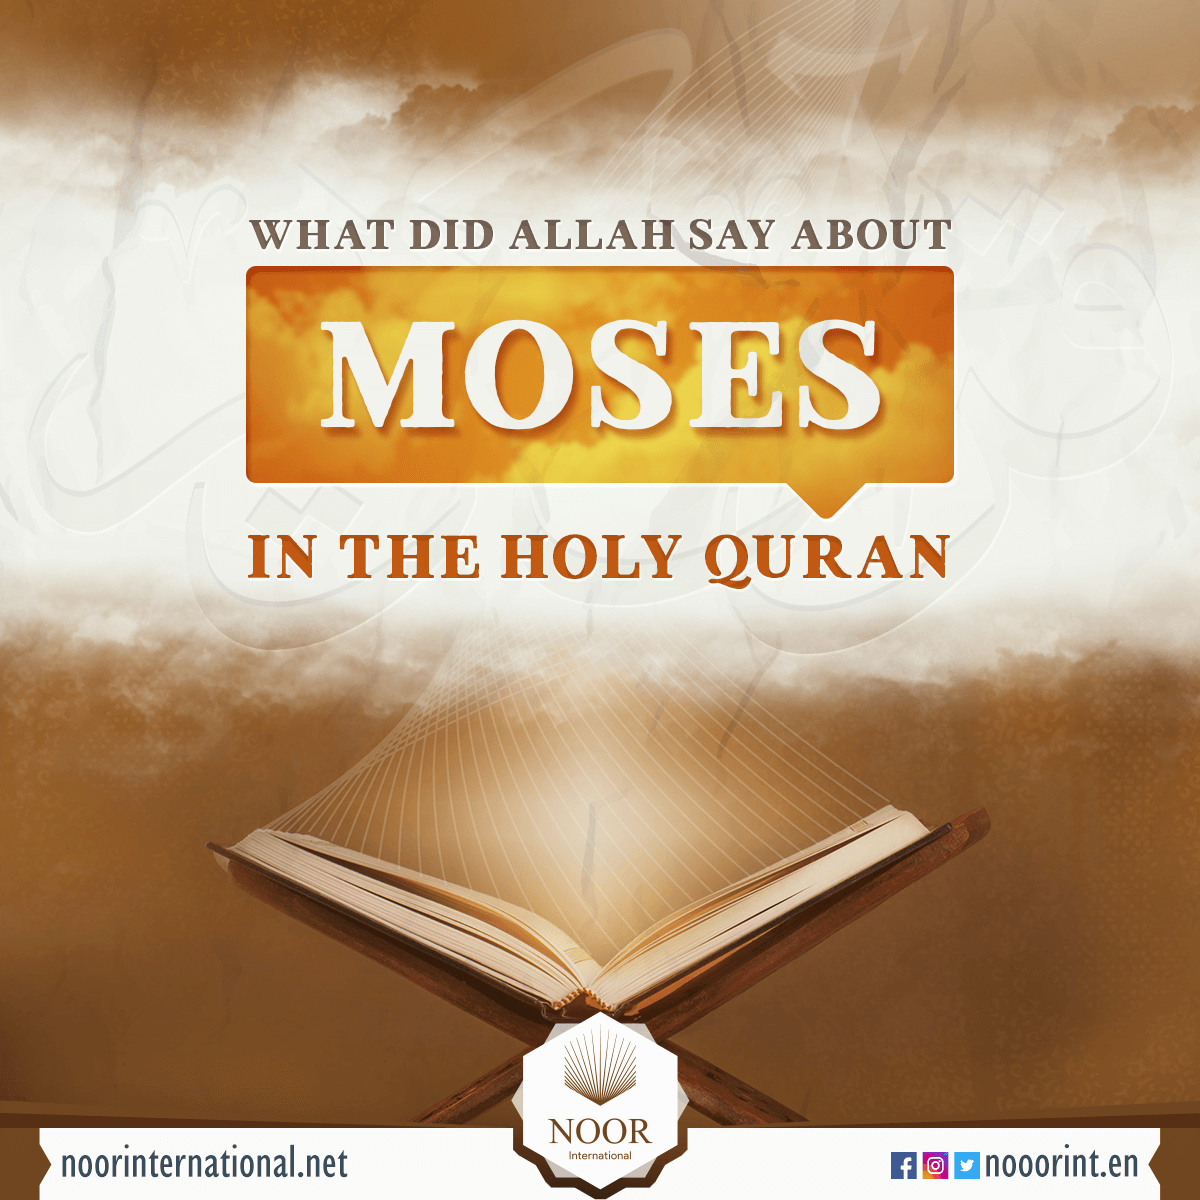 Moses in the Quran